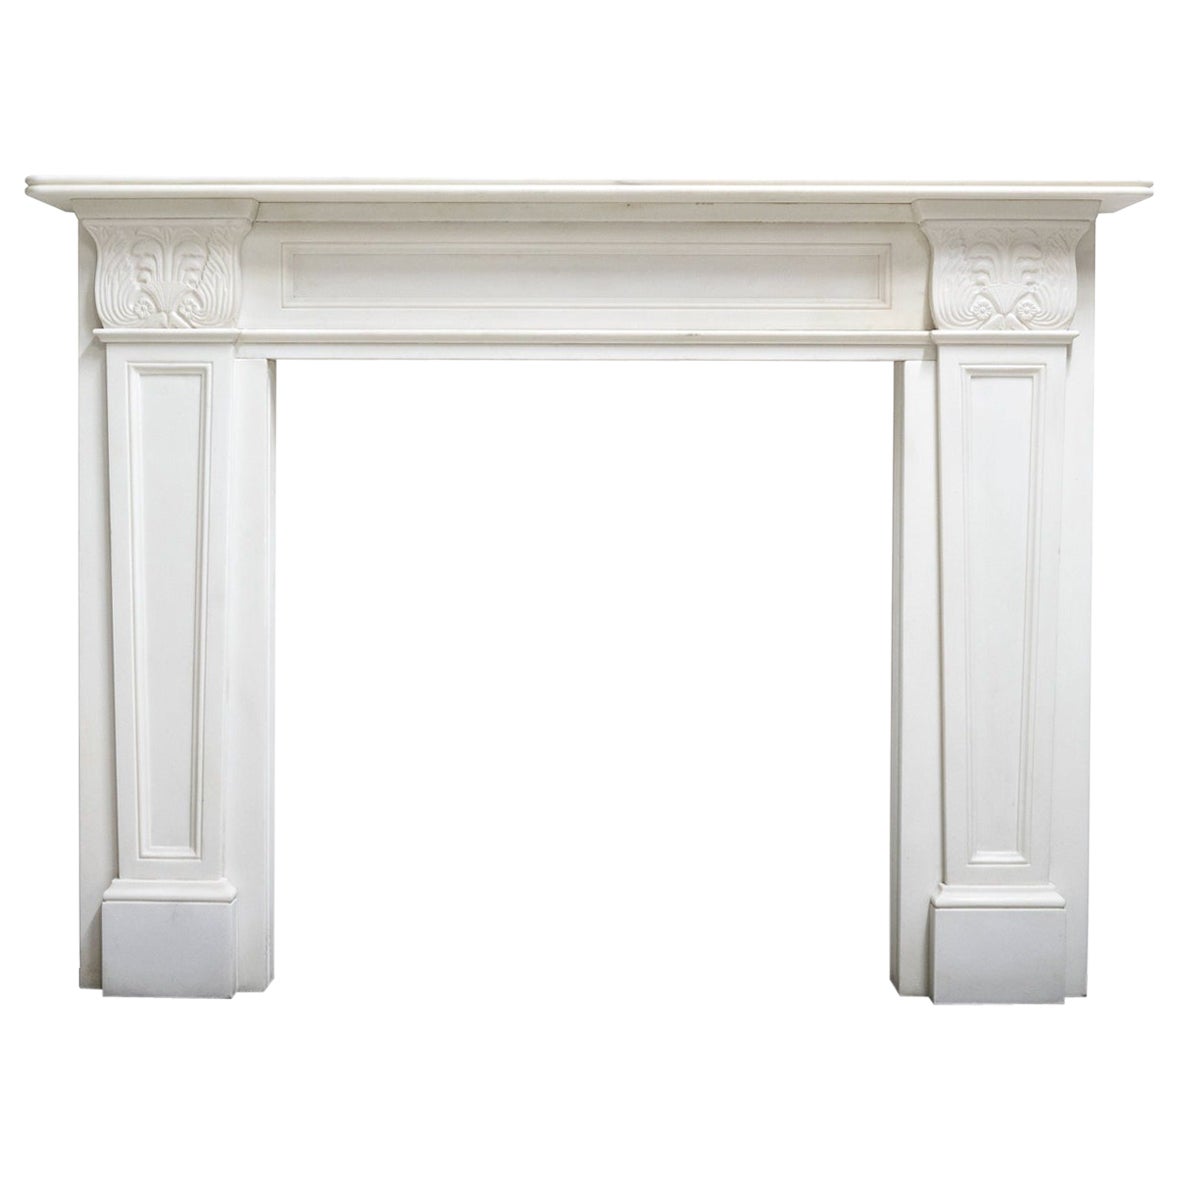 One of a Pair Regency Style Statuary Marble Surround with Acanthus For Sale